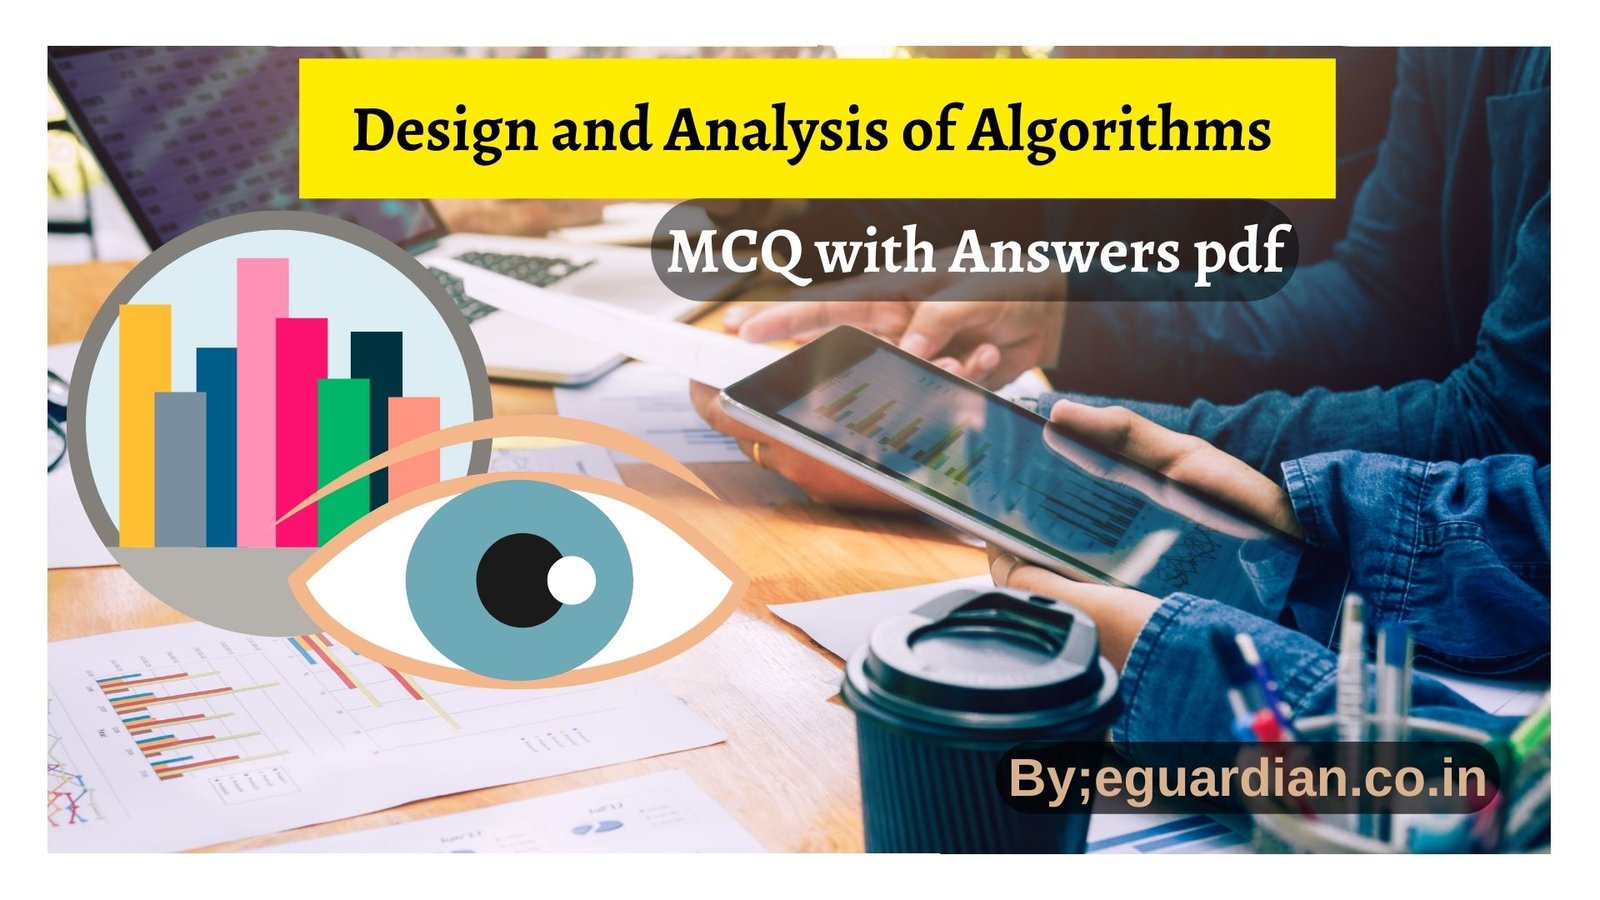 Design and Analysis of Algorithms MCQ